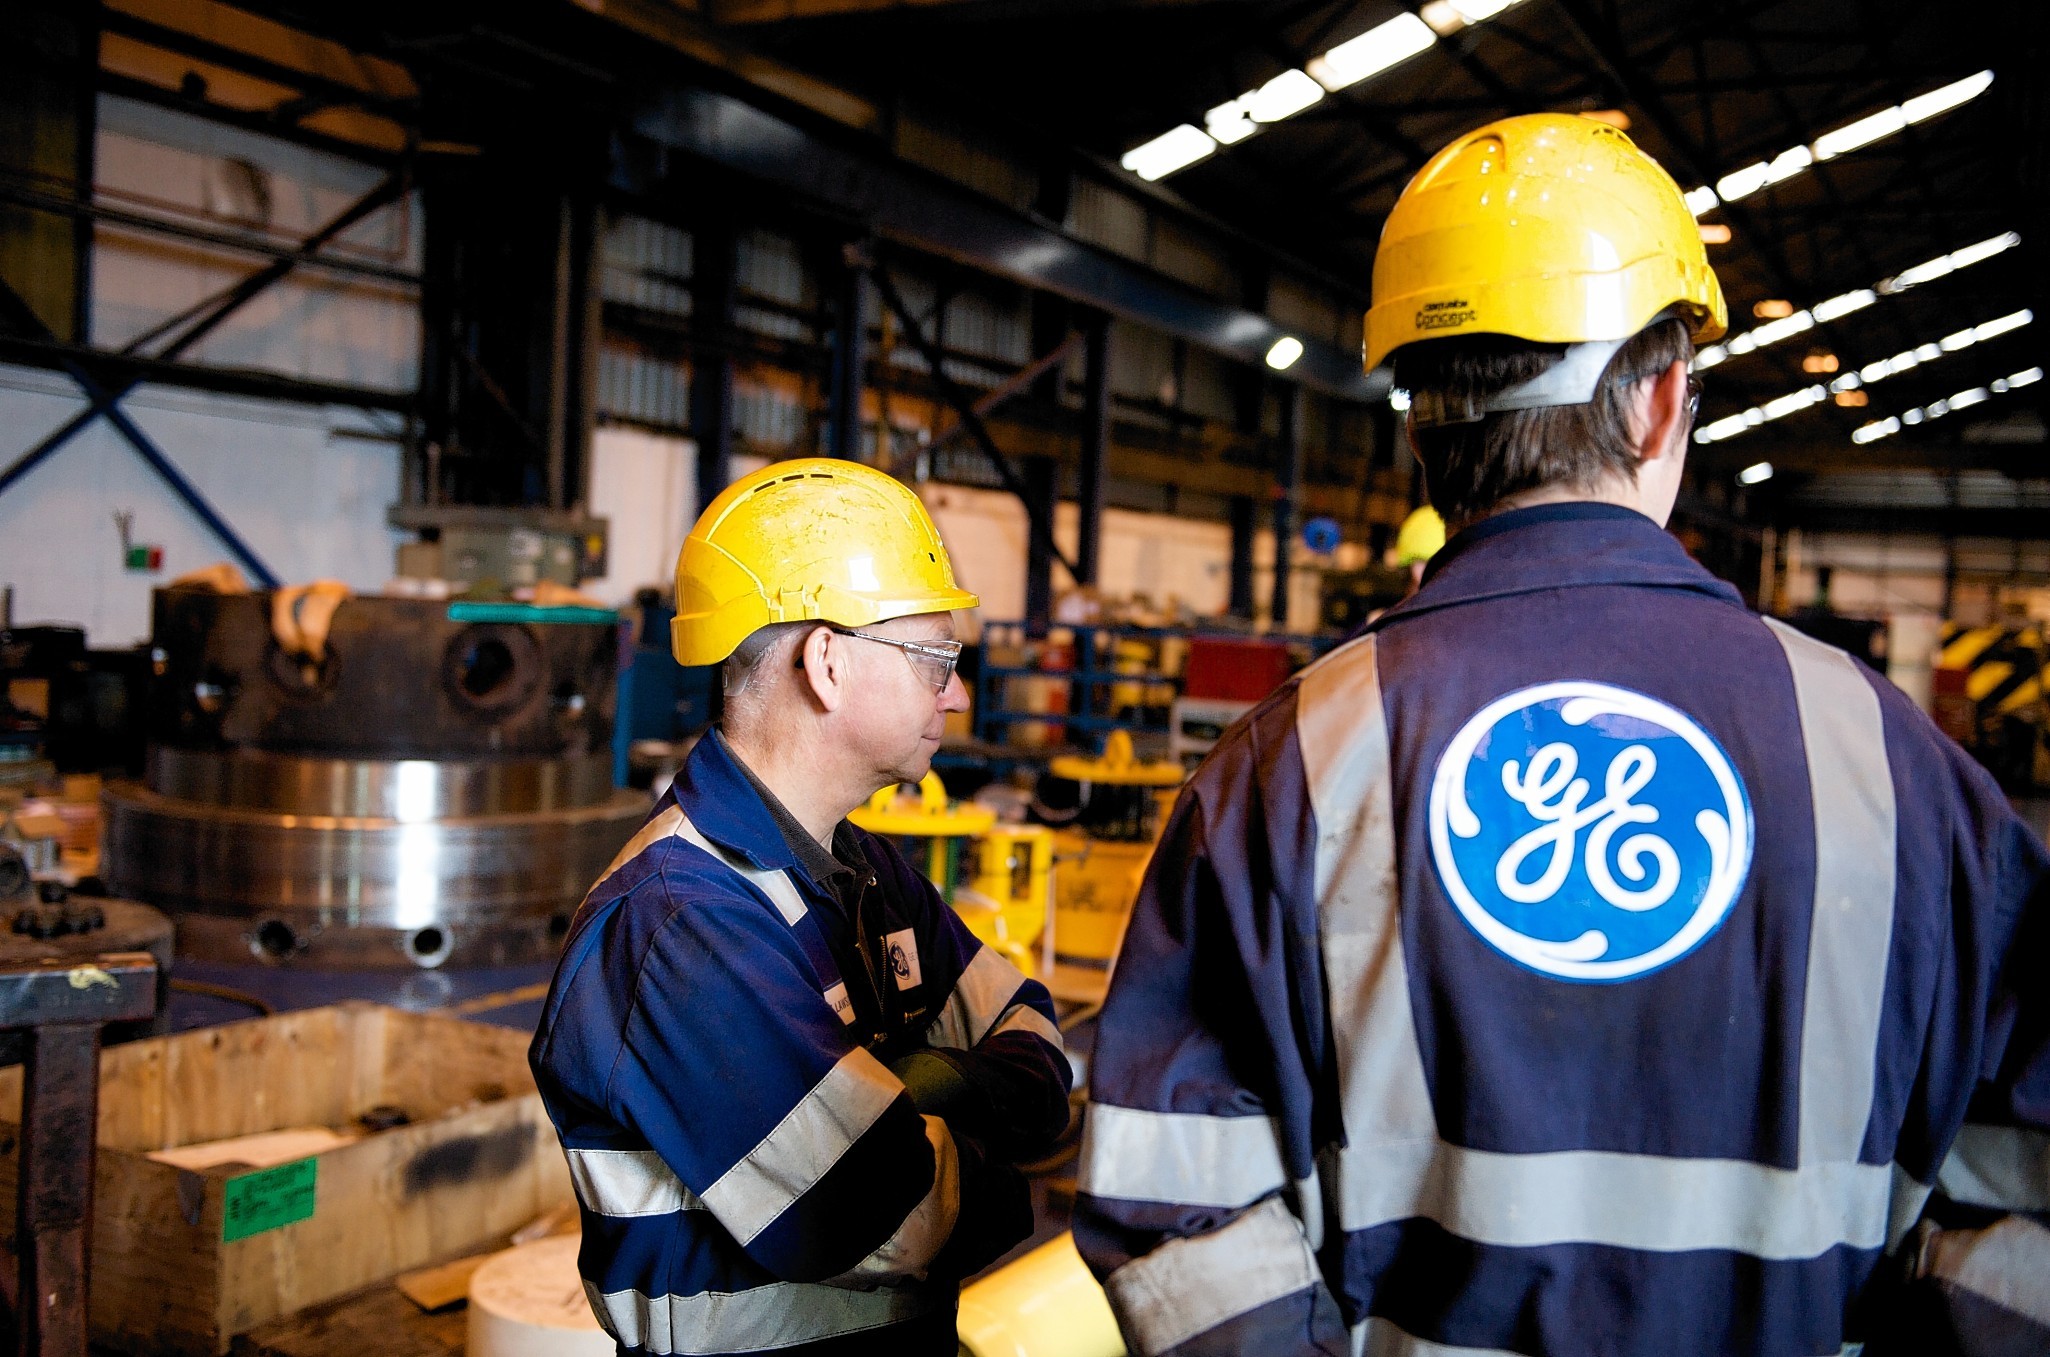 A file photo of employees at GE Oil and Gas's Montrose facility

(handout pic)